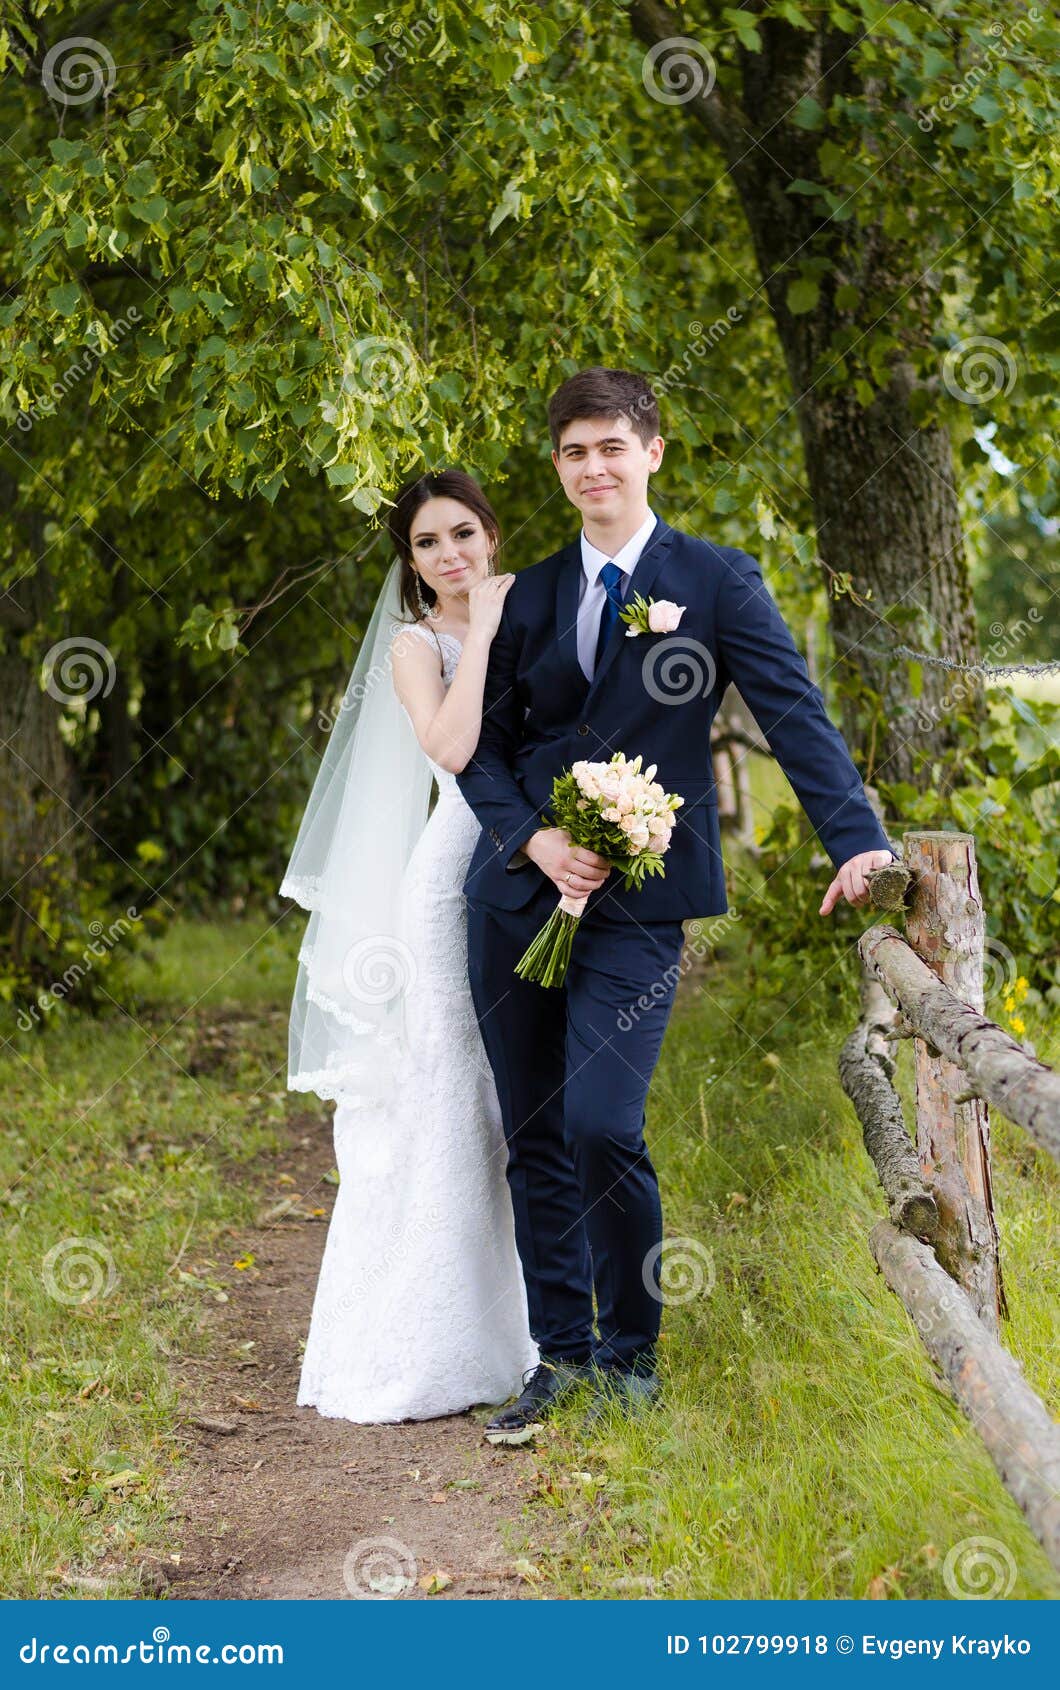 A Beautiful Married Couple in Wedding Dresses, Posing for a Photo Shooting  in an Belarusian Village Near the Fence, with a Wedding Stock Photo - Image  of green, beautiful: 102799918